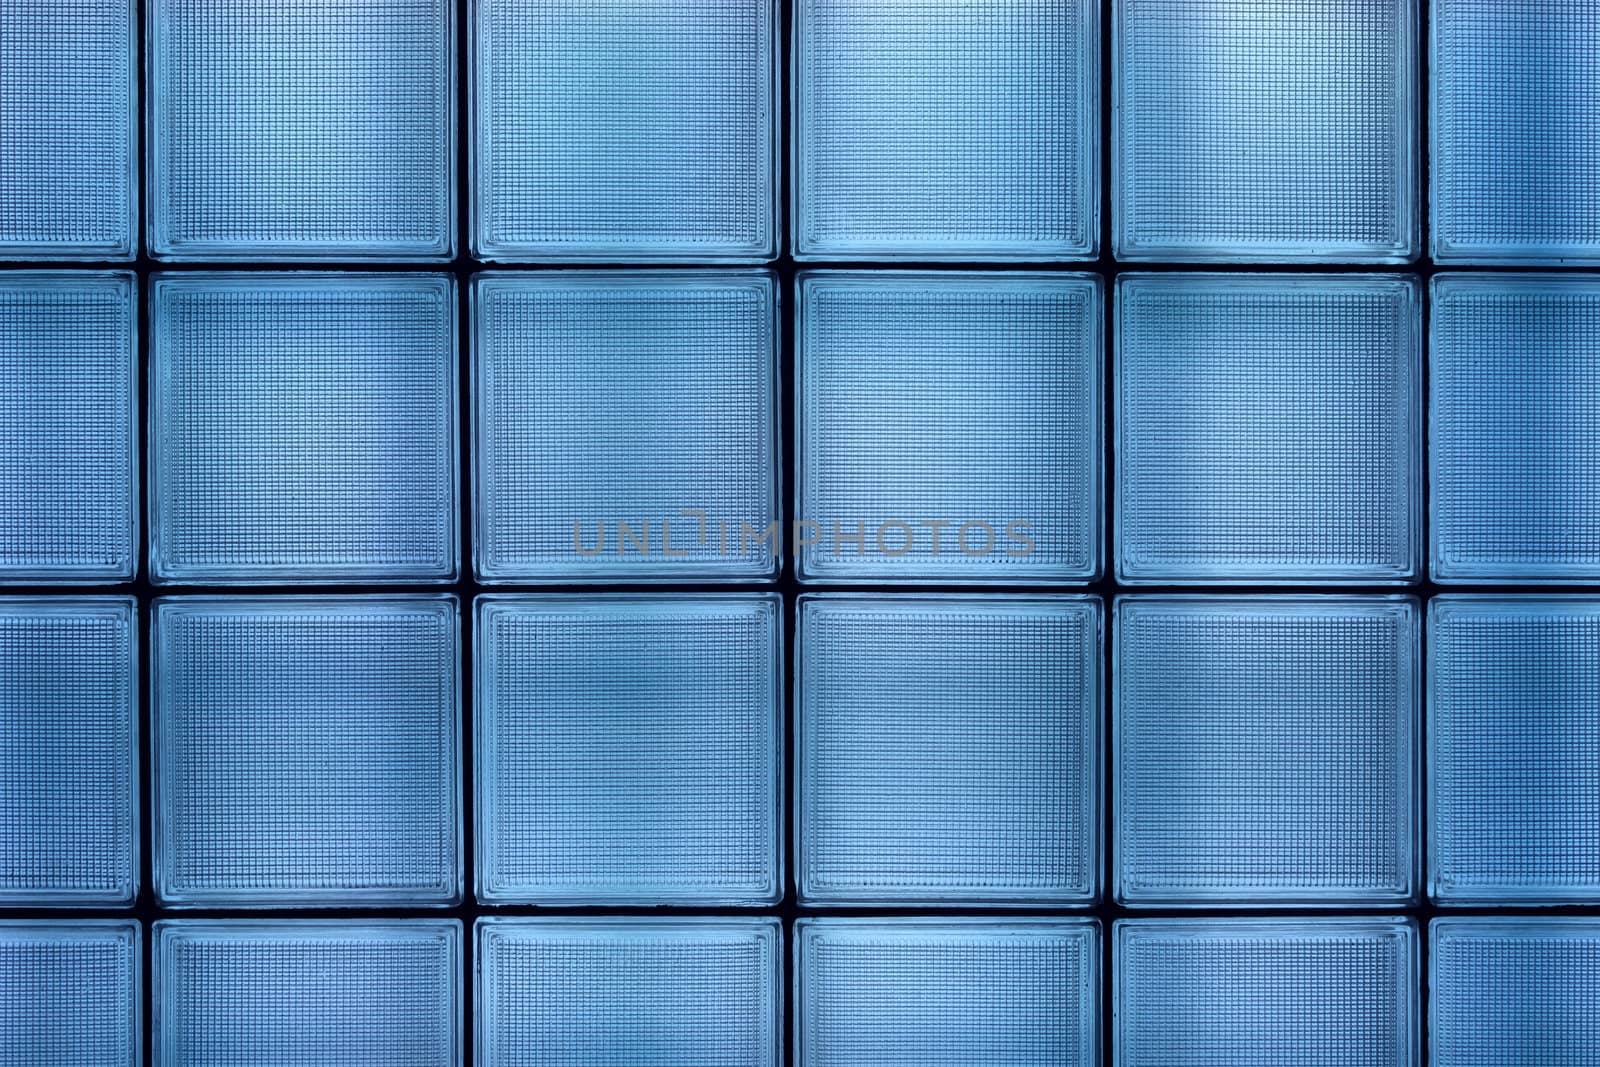 Blue glass tile wall by anterovium